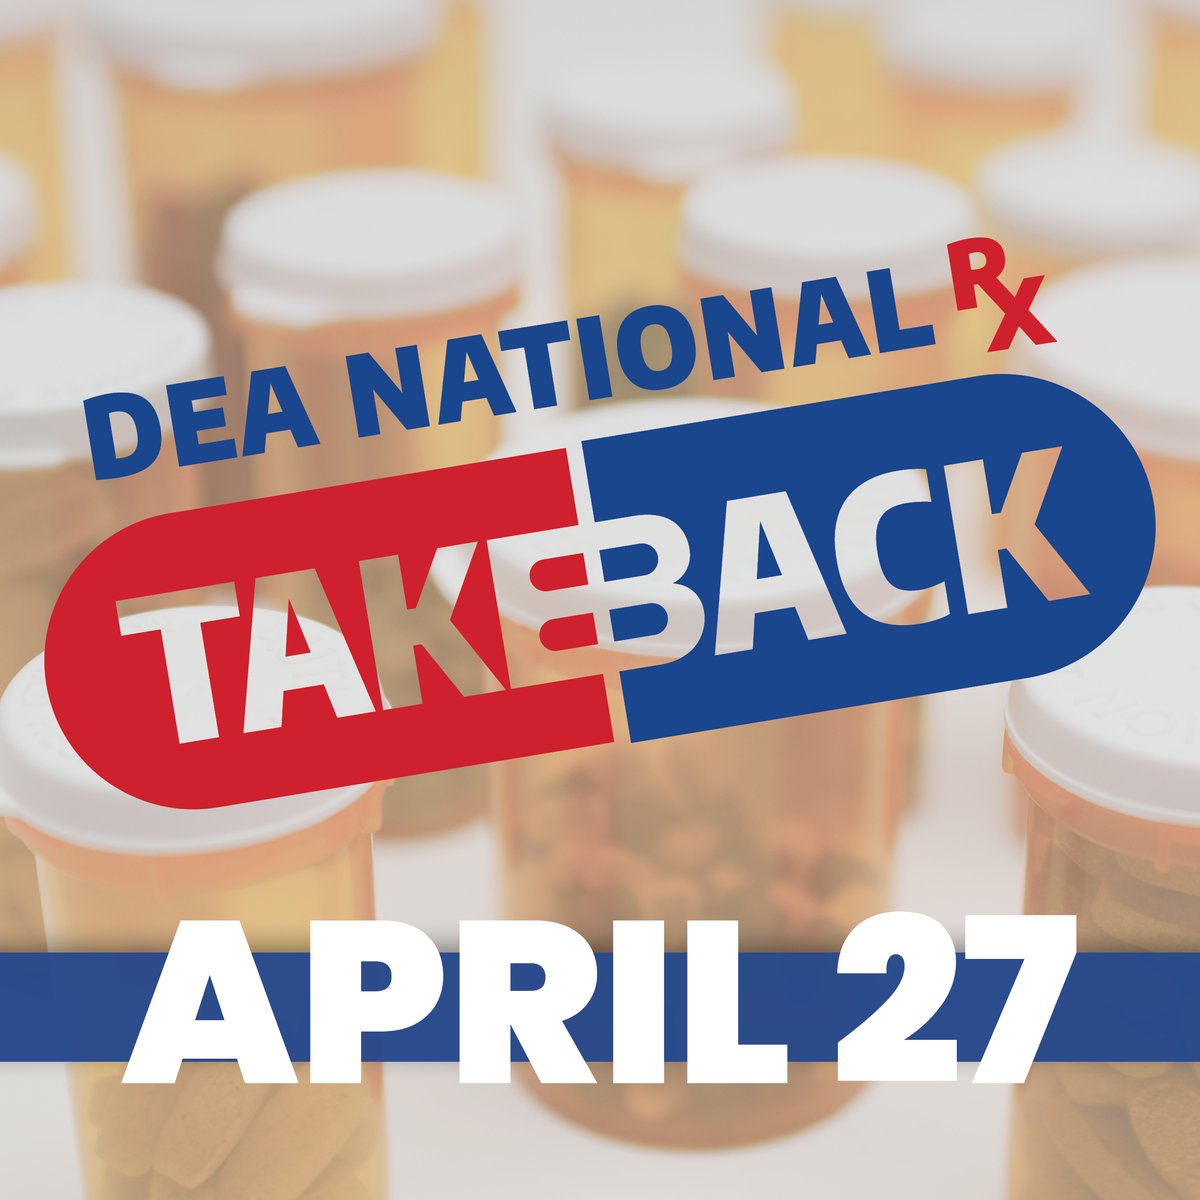 Tomorrow is #NationalDrugTakeBackDay which aims to provide a safe, convenient, and responsible means of disposing unused or unwanted prescription drugs. Here are ways to prepare for Take Back Day:
- Locate all medications in your household and ensure they are securely stored
 ...